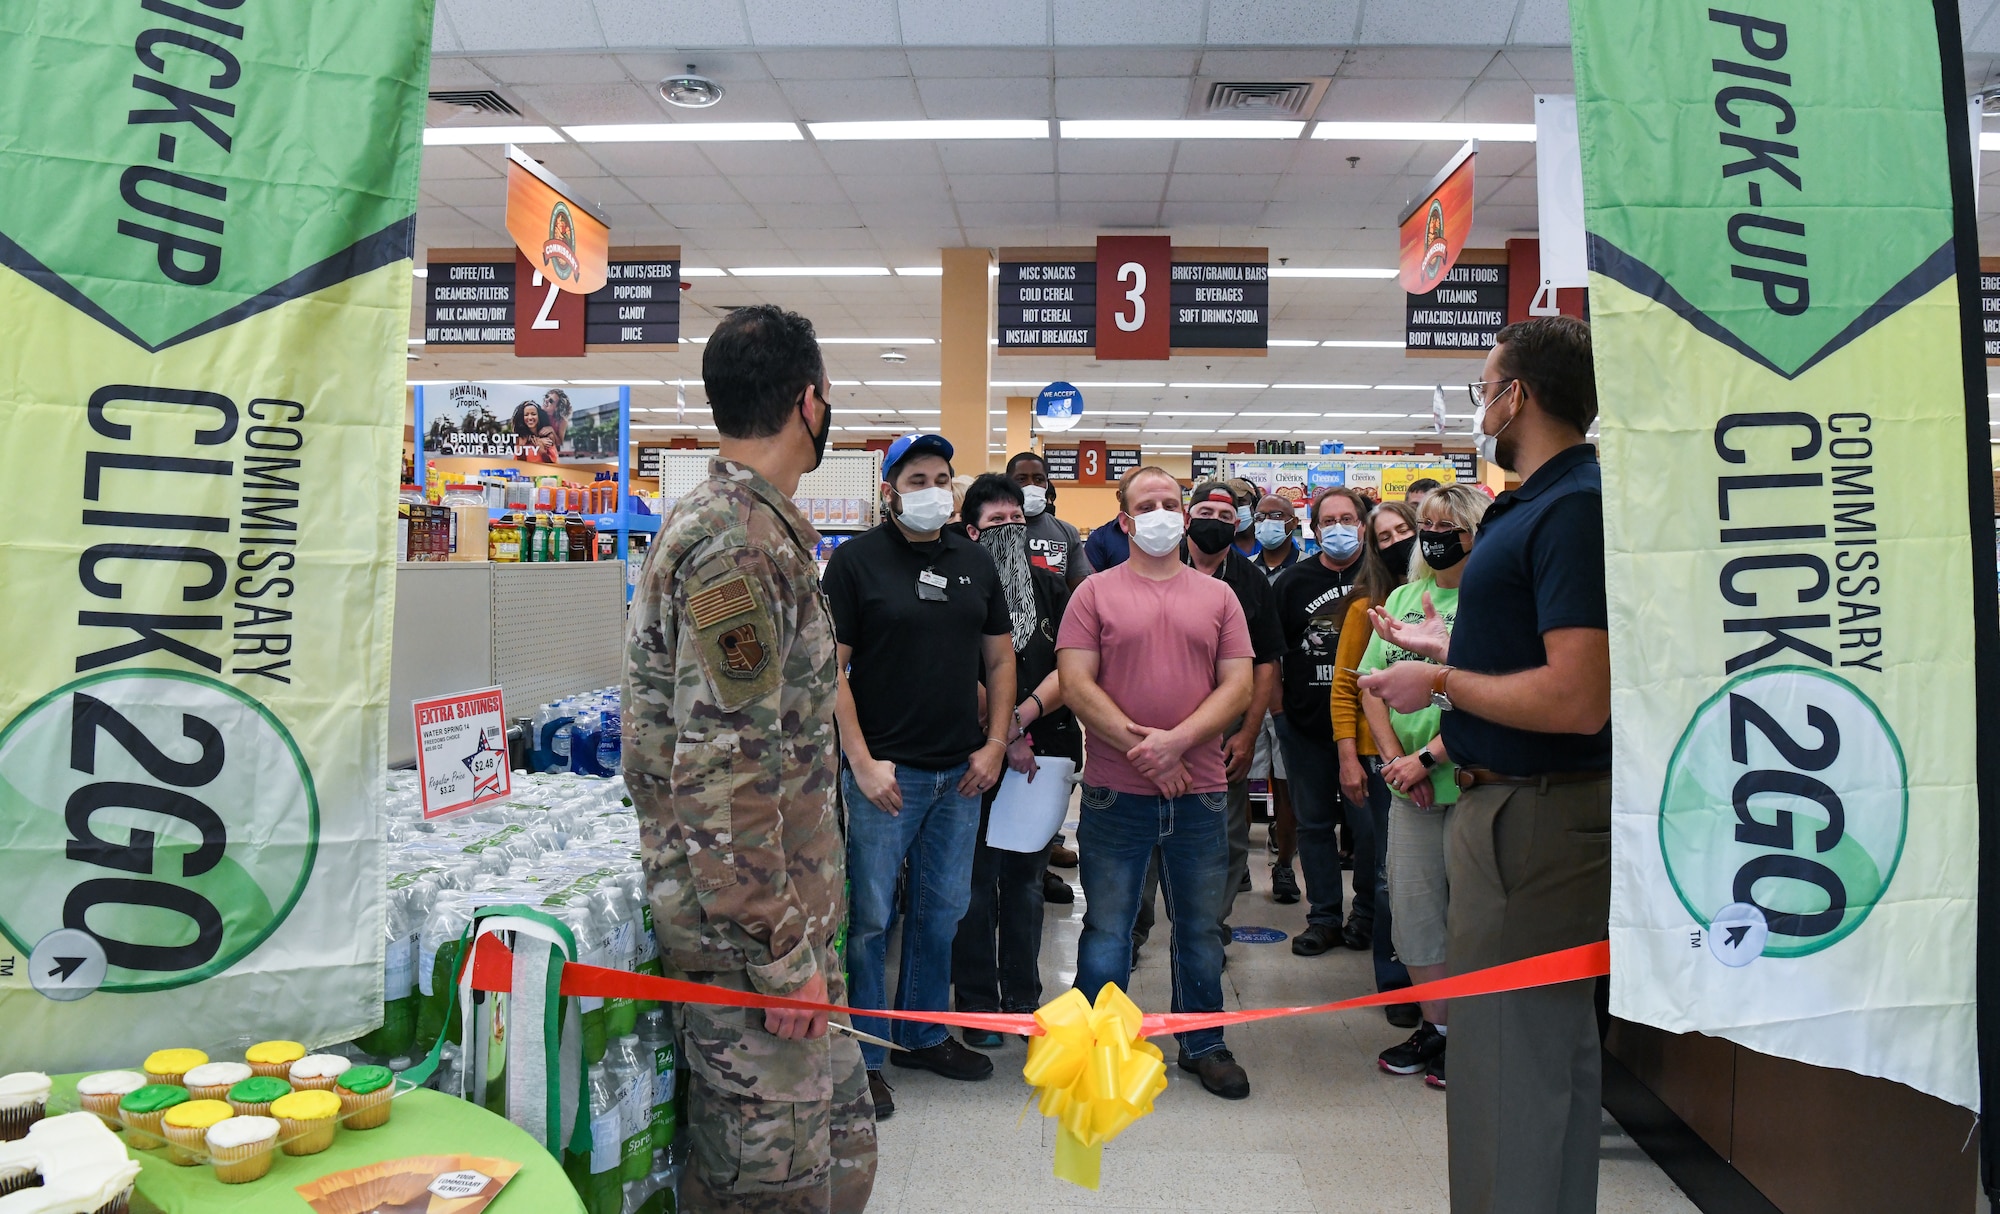 Brandon Jelson, right, Arnold Air Force Base Commissary store director, addresses the staff of the Arnold AFB Commissary before a ribbon cutting for the launch of the CLICK2GO online ordering and curbside pick-up service at the commissary, Aug. 3, 2021, at Arnold AFB, Tenn. Also pictured, left, is Col. Jeffrey Geraghty, commander of Arnold Engineering Development Complex, headquartered at Arnold AFB. (U.S. Air Force photo by Jill Pickett)